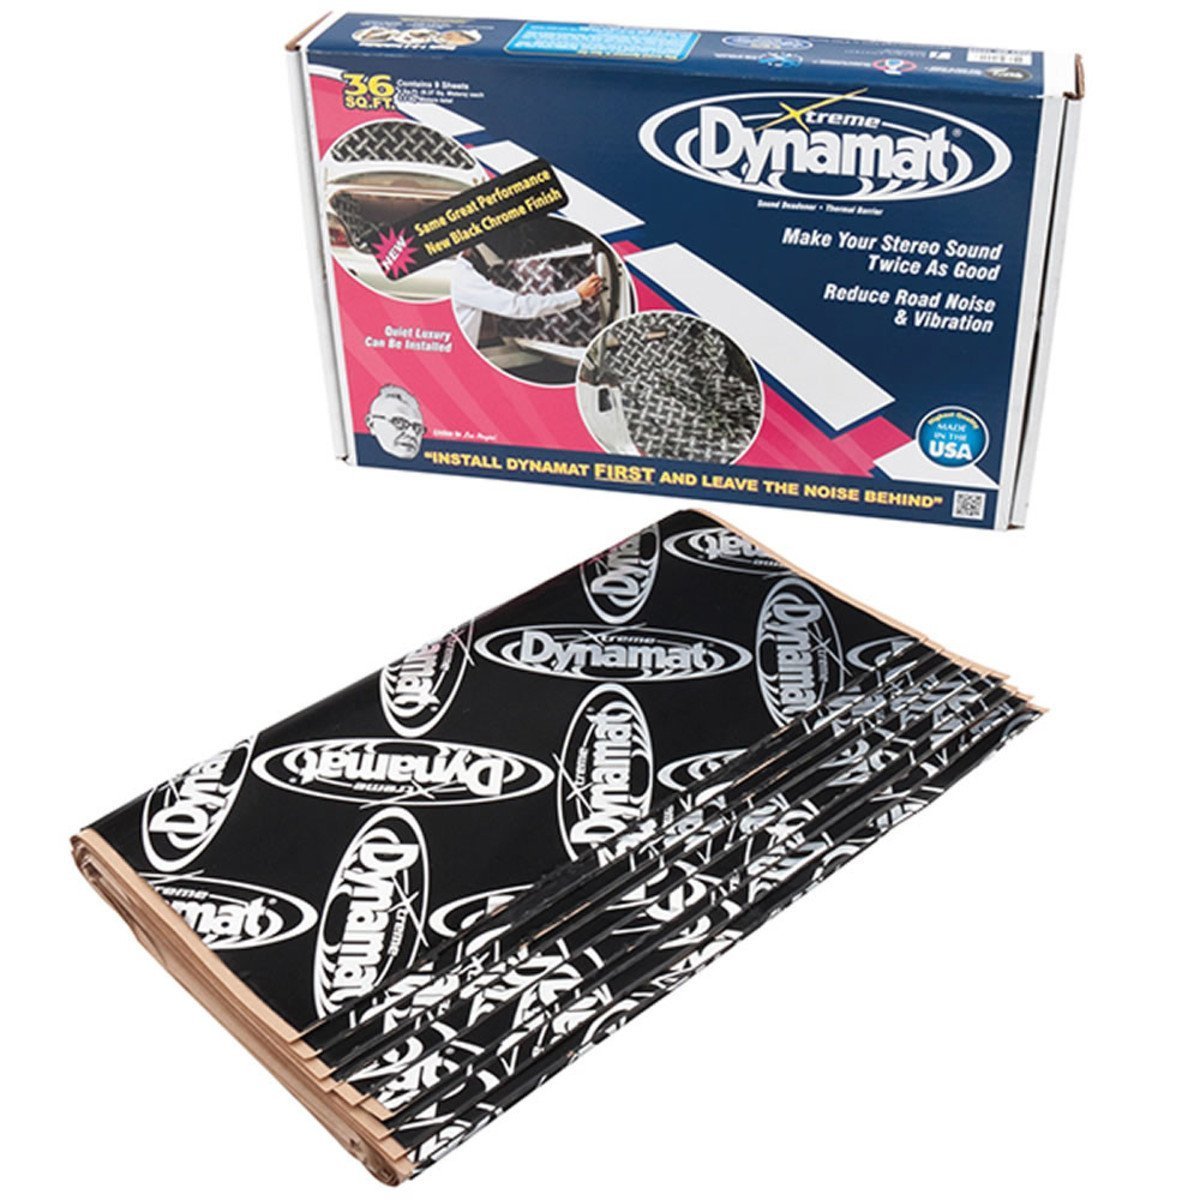 Dynamat 10455 Xtreme Bulk Pack 36 SQ FT (9 Sheets) Sound/Vibration Damping for an Entire Car